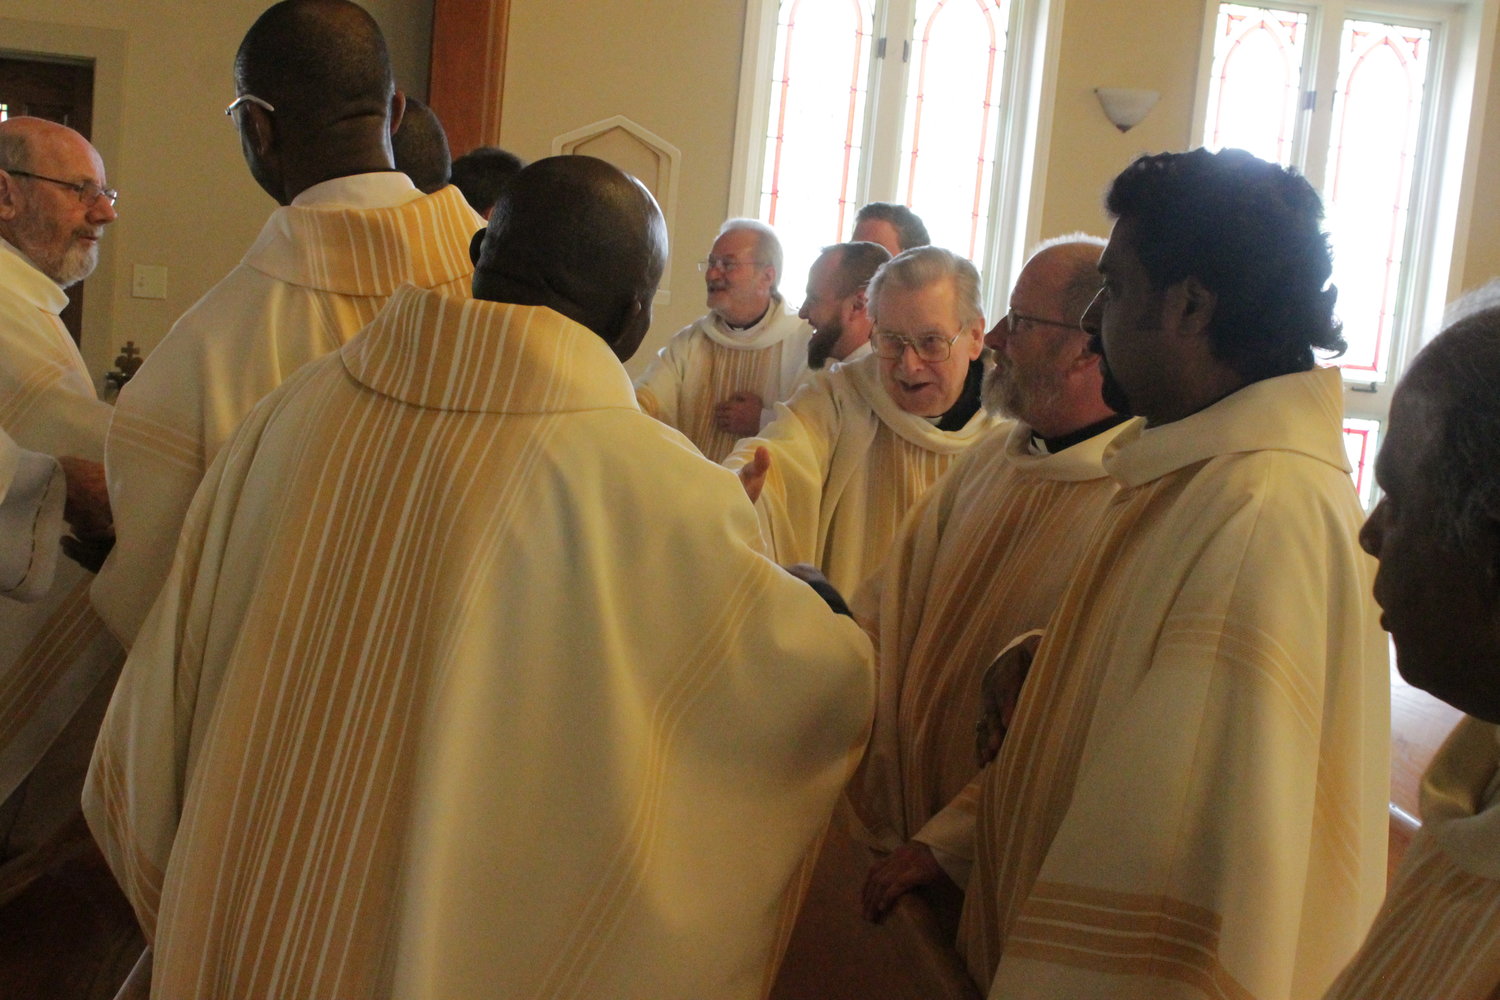 Priests exchange a sign of peace during the Mass.